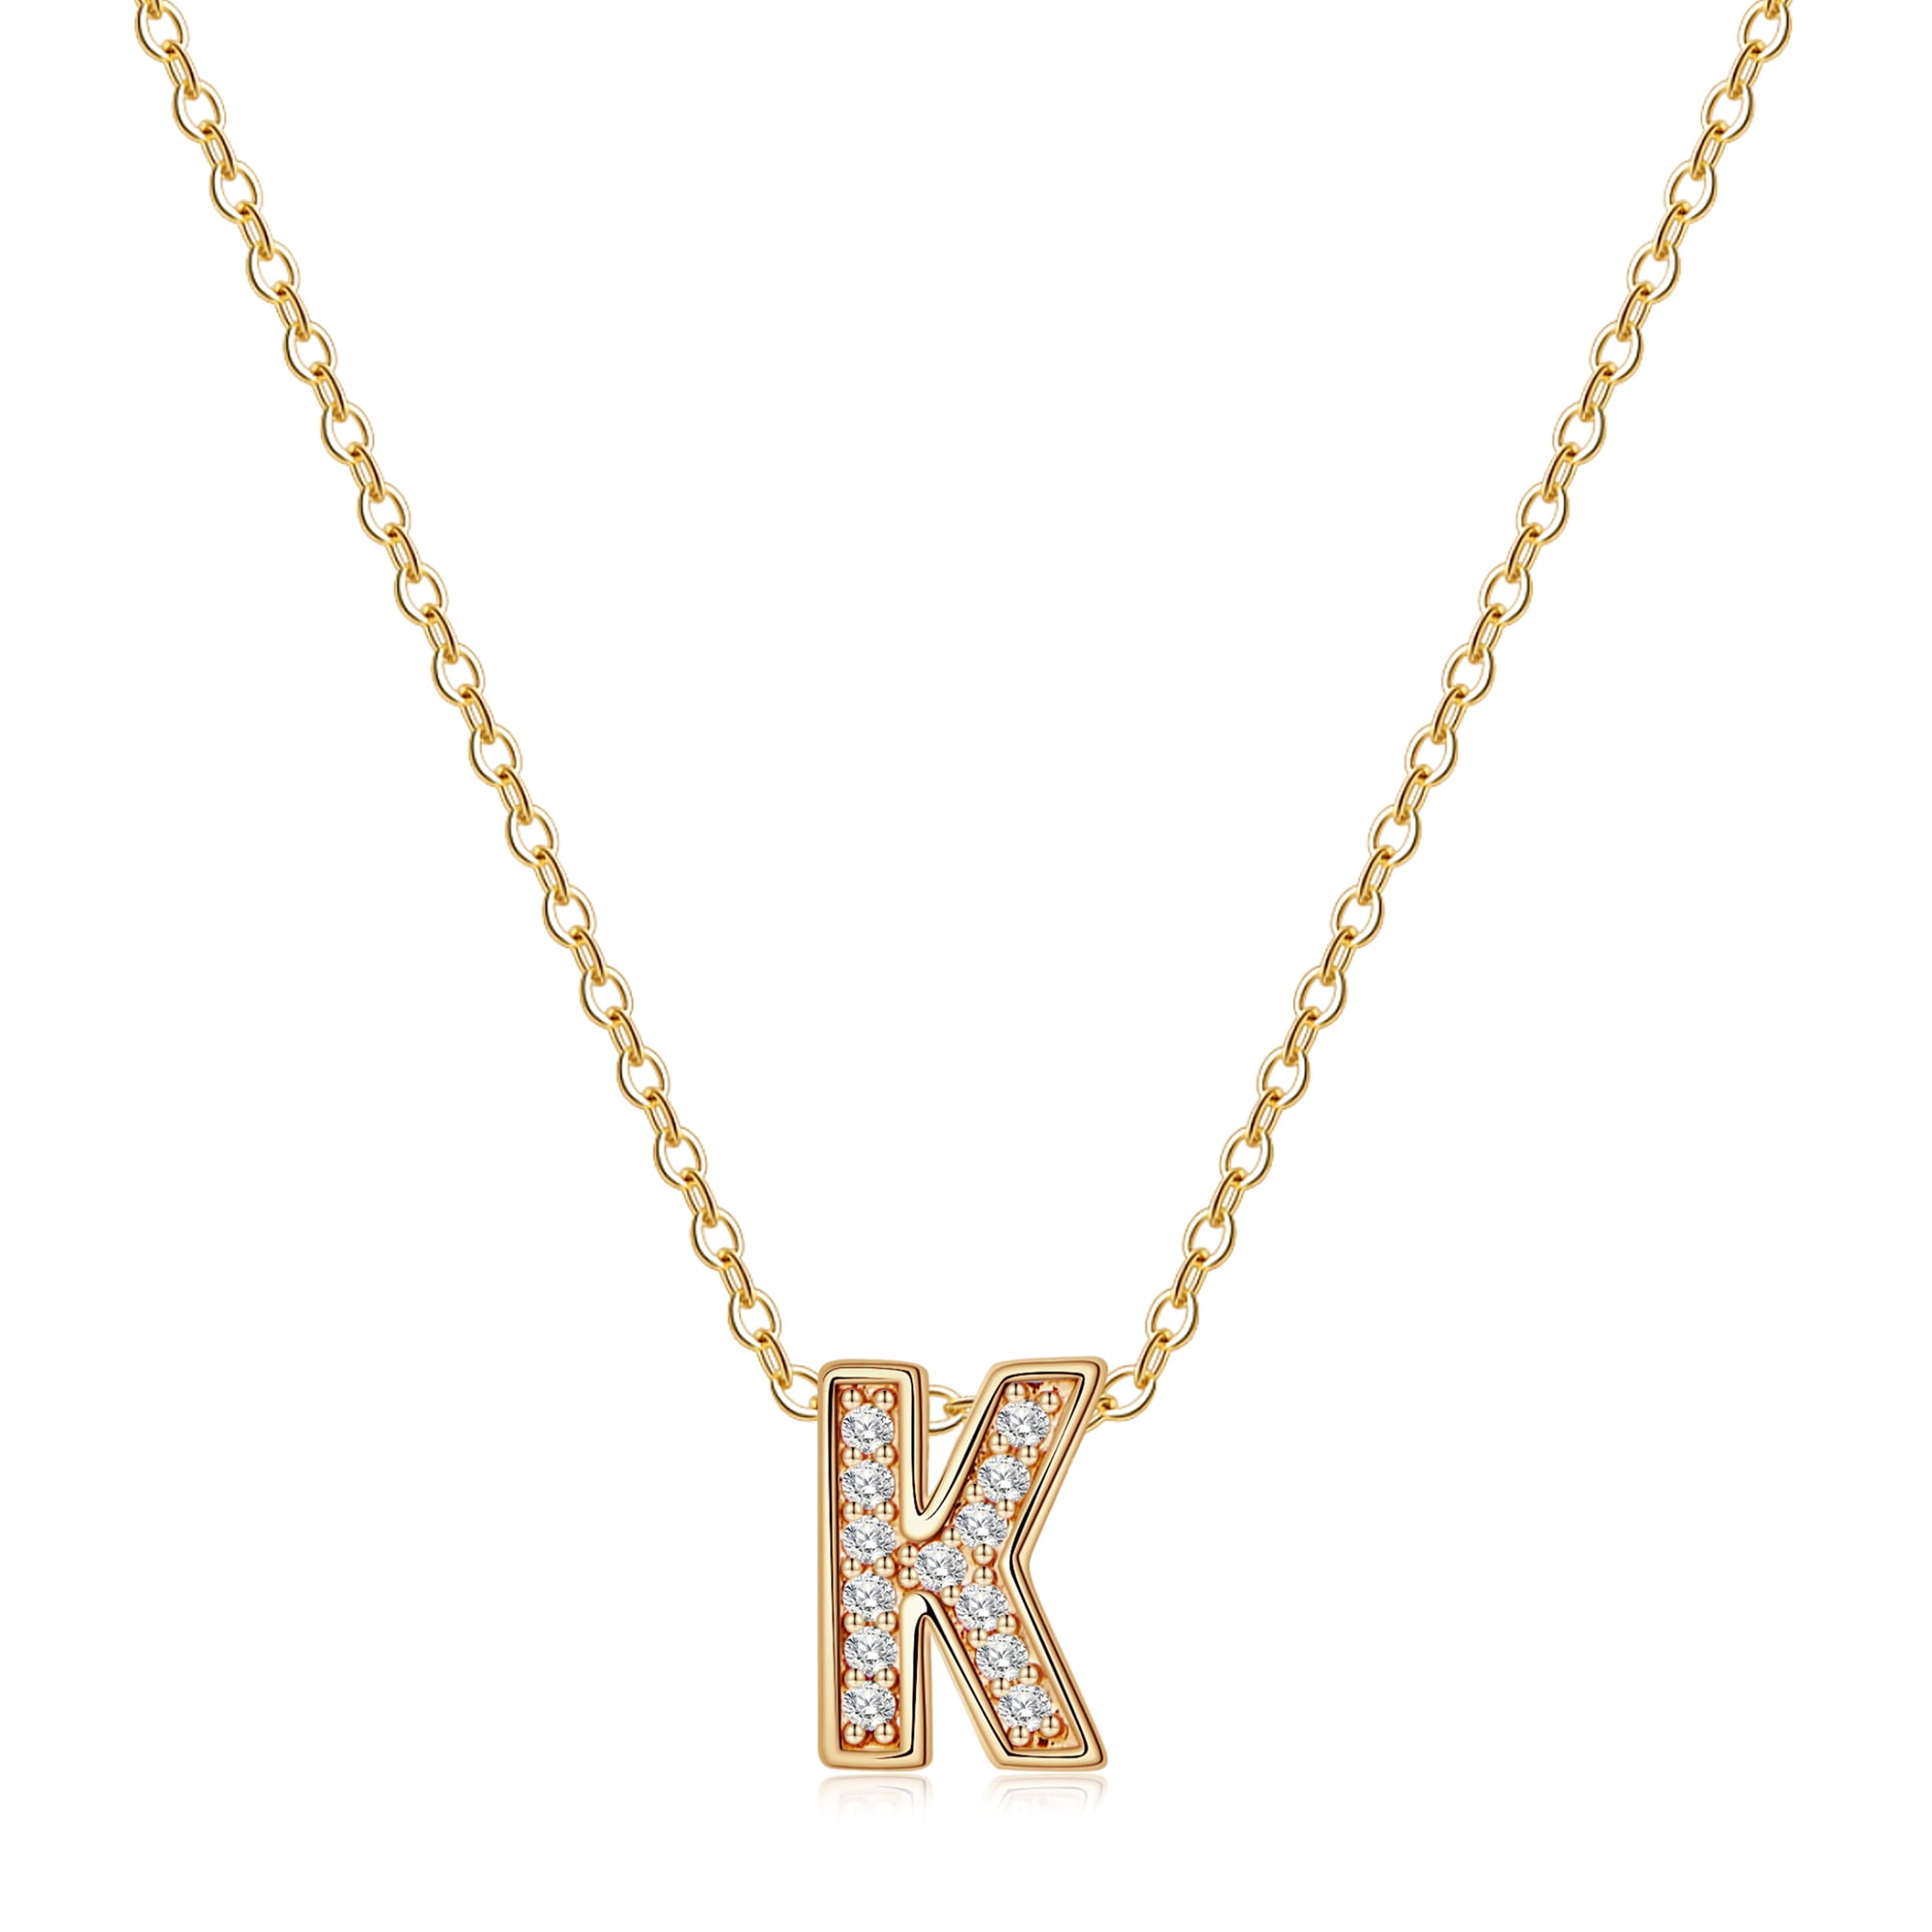 Cubic Zirconia Letter Initial Pendant Necklace 14k Gold Filled Dainty Personalized Alphabet 26 Initial Monogram Necklace for Girls Jewelry Gifts MONOZO Tiny Initial Necklace for Women 